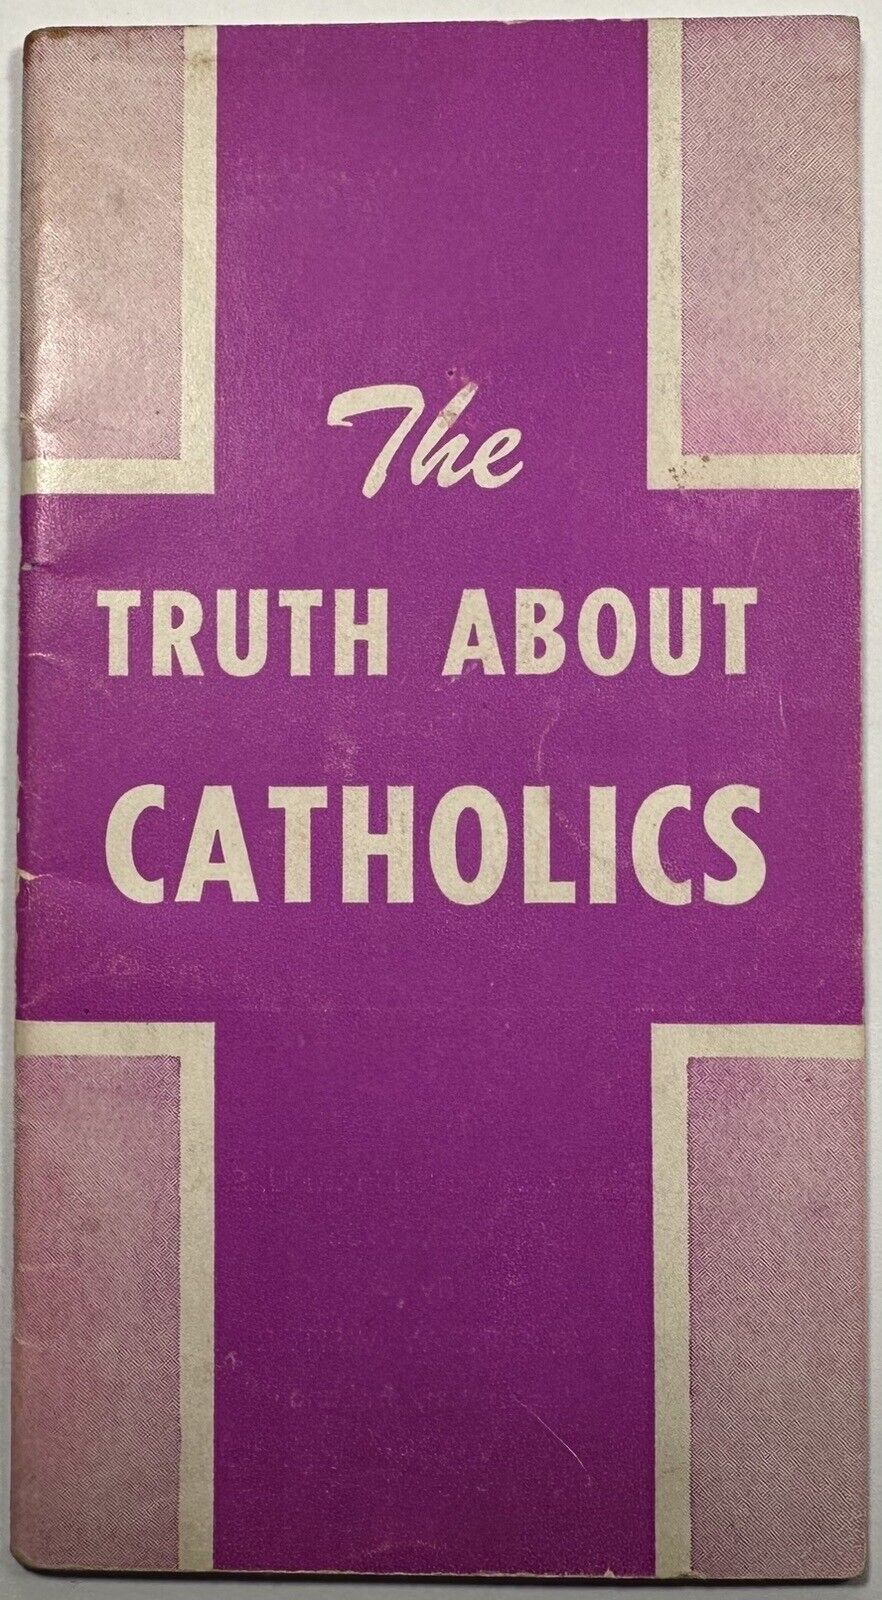 The Truth About Catholics, Vintage 1956 Holy Devotional Booklet.